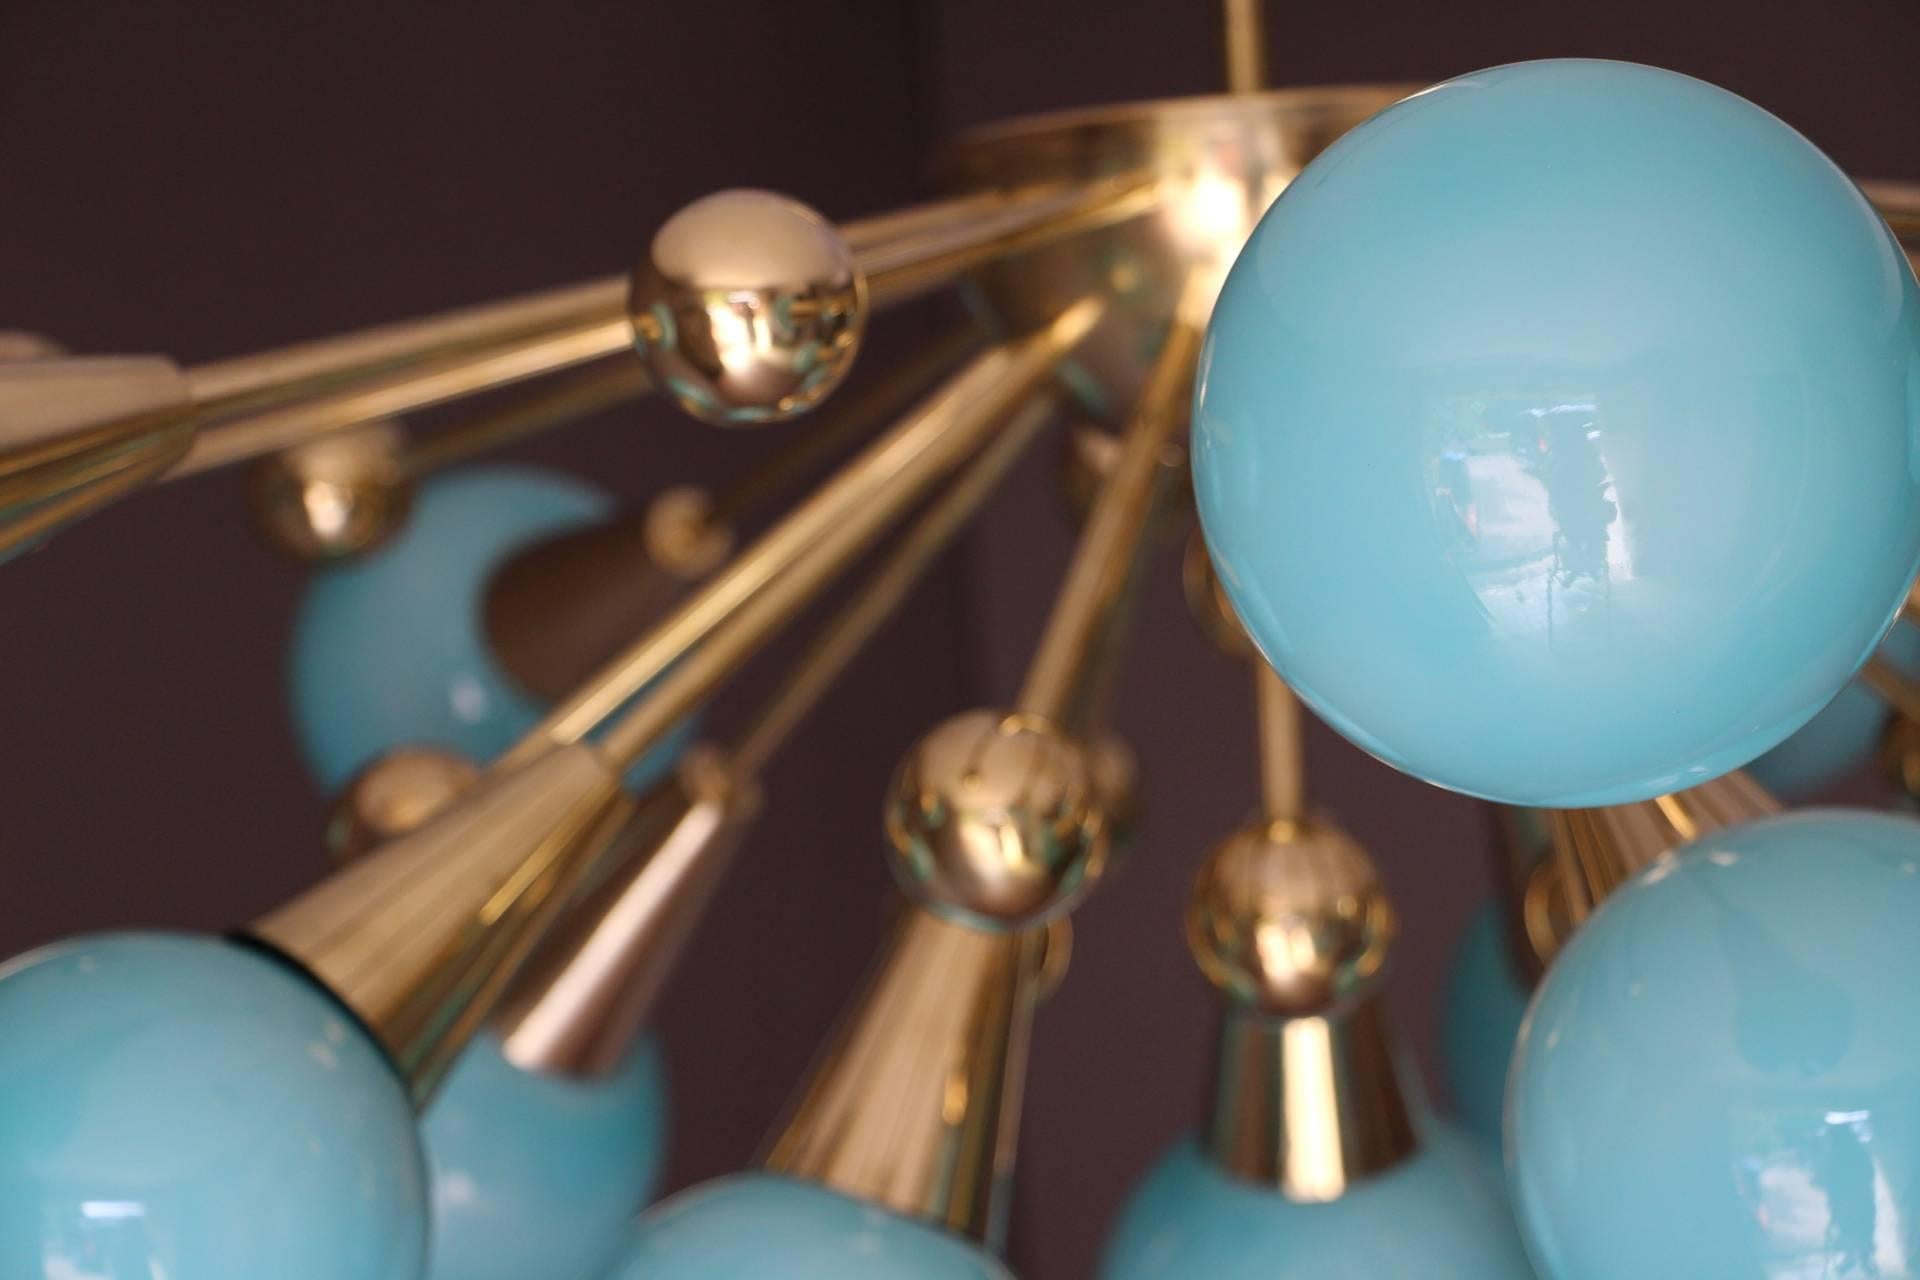 This brass chandelier features 15 turquoise blue Murano glass globes and 15 brass balls extends on brass stems from its centre.
When light is on, its turquoise globes turn to light blue color.
Unusual dimensions: Only 70 cm height and 110 cm